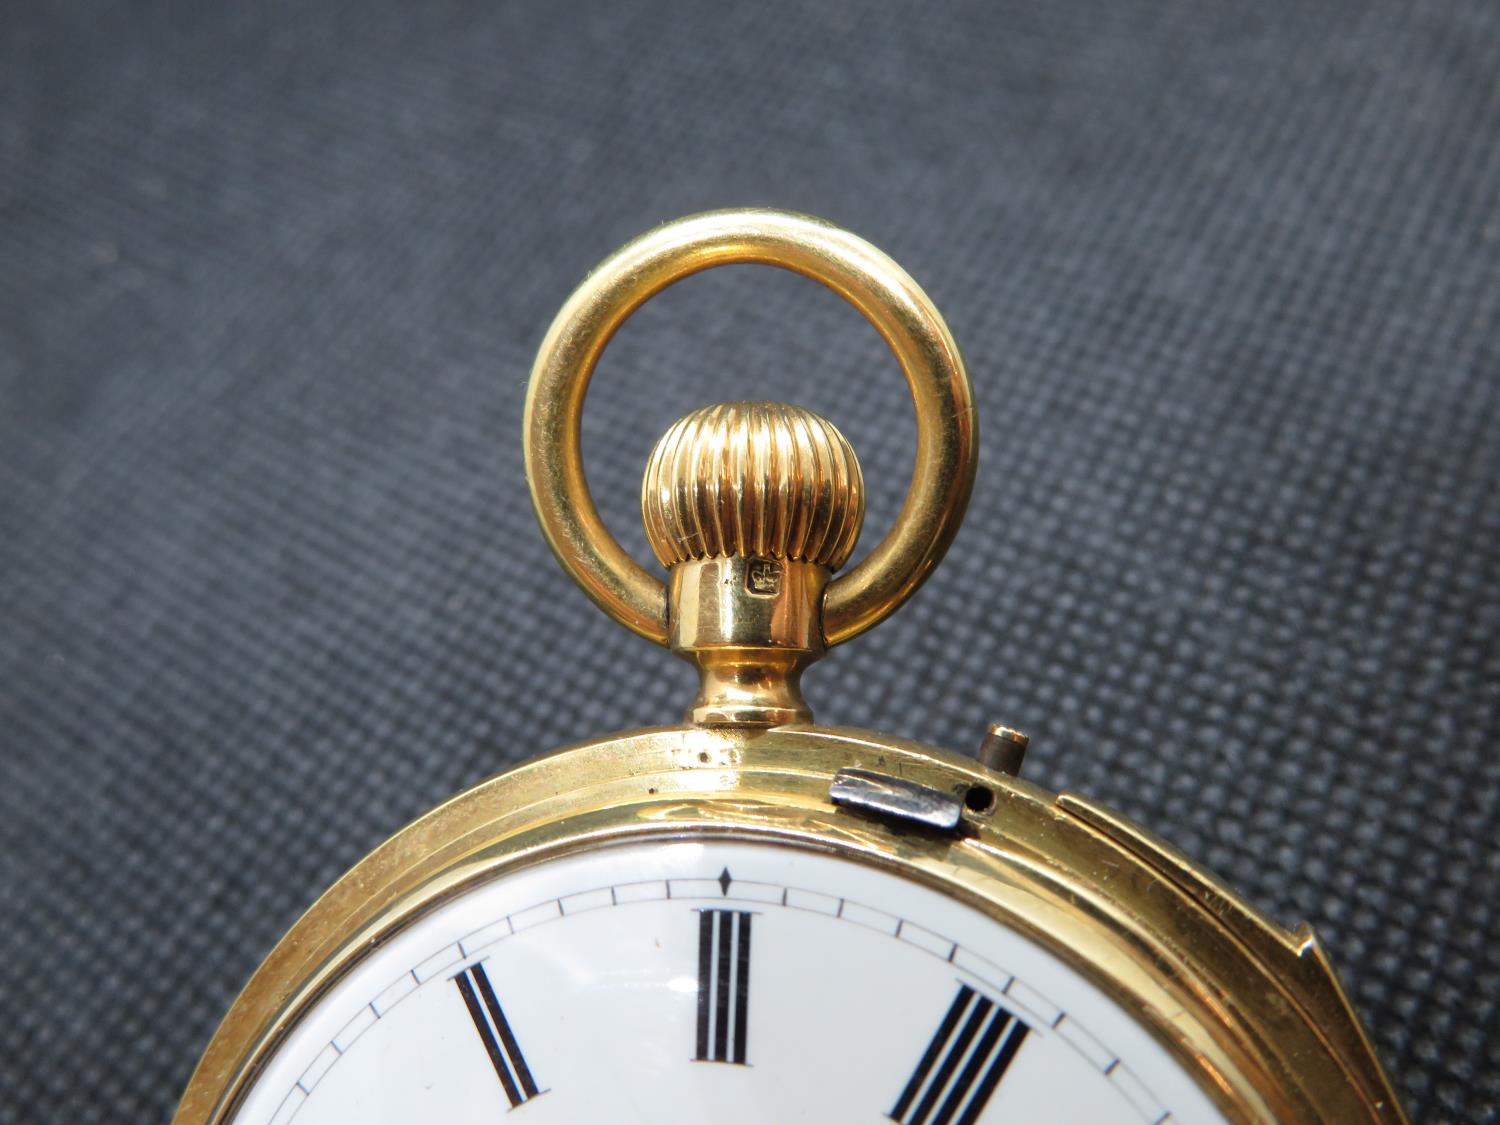 18ct gold full Hunter pocket watch with minute repeater by Dent of London fully HM - Image 5 of 13